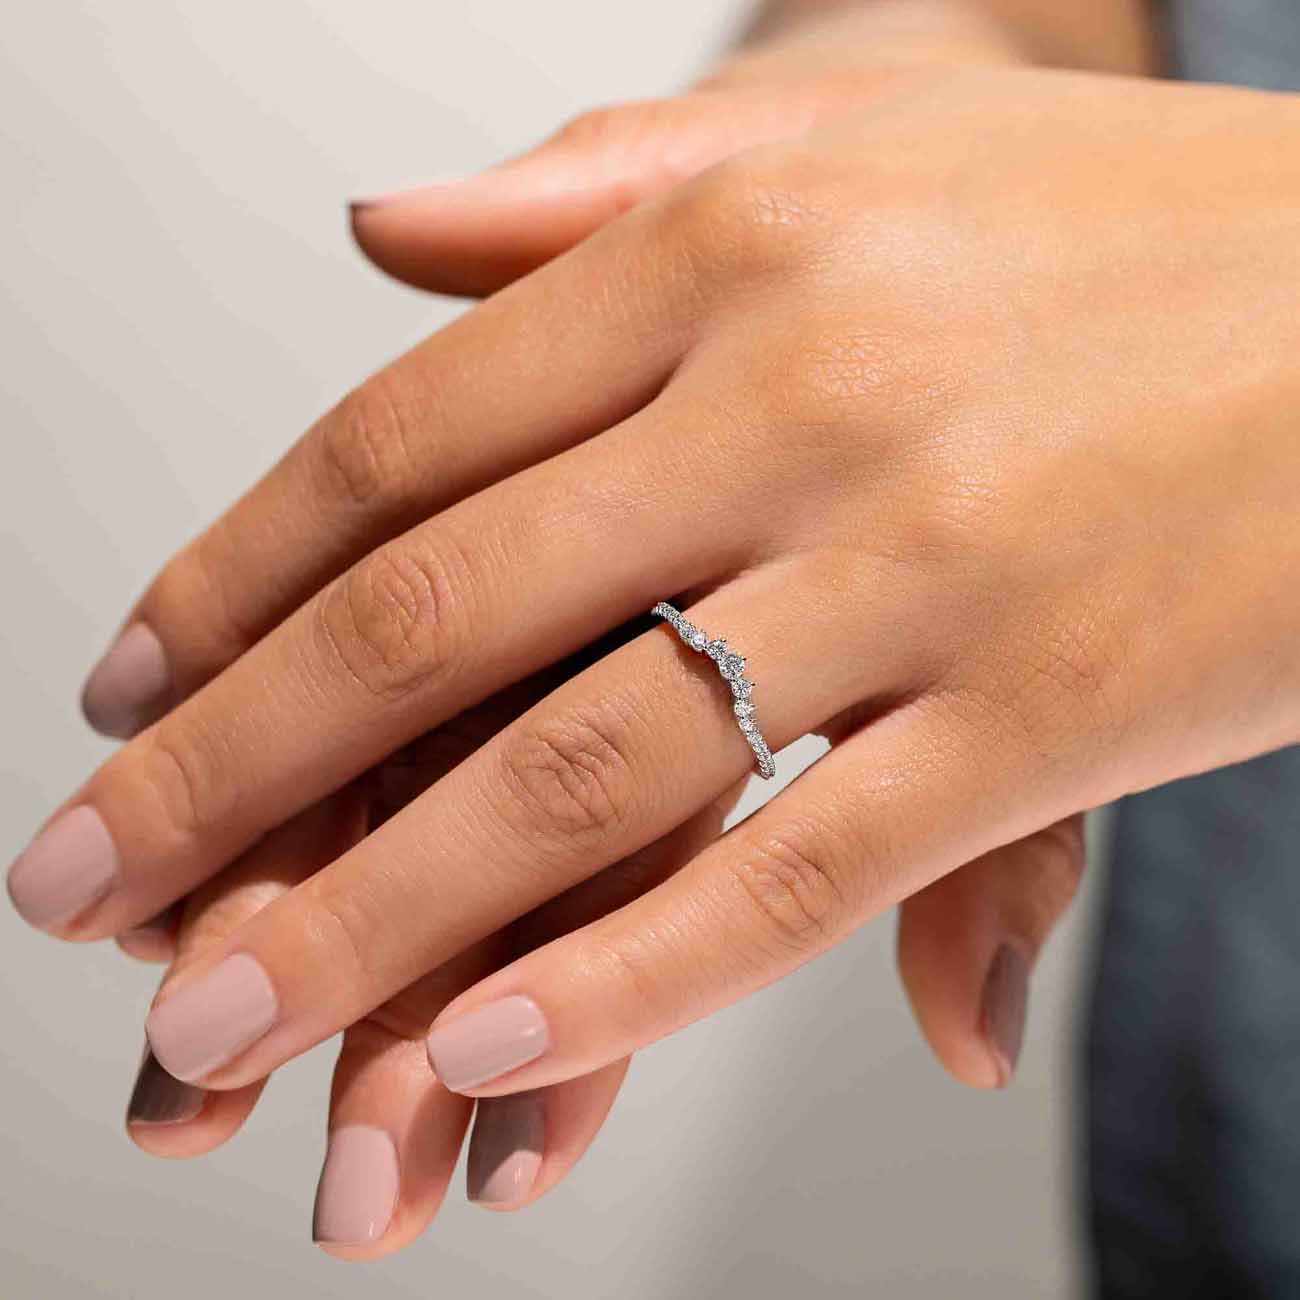 Everly Accented Wedding Band Shown in 14K White Gold|everly lab grown diamond accented contour band shown in 14k white gold metal